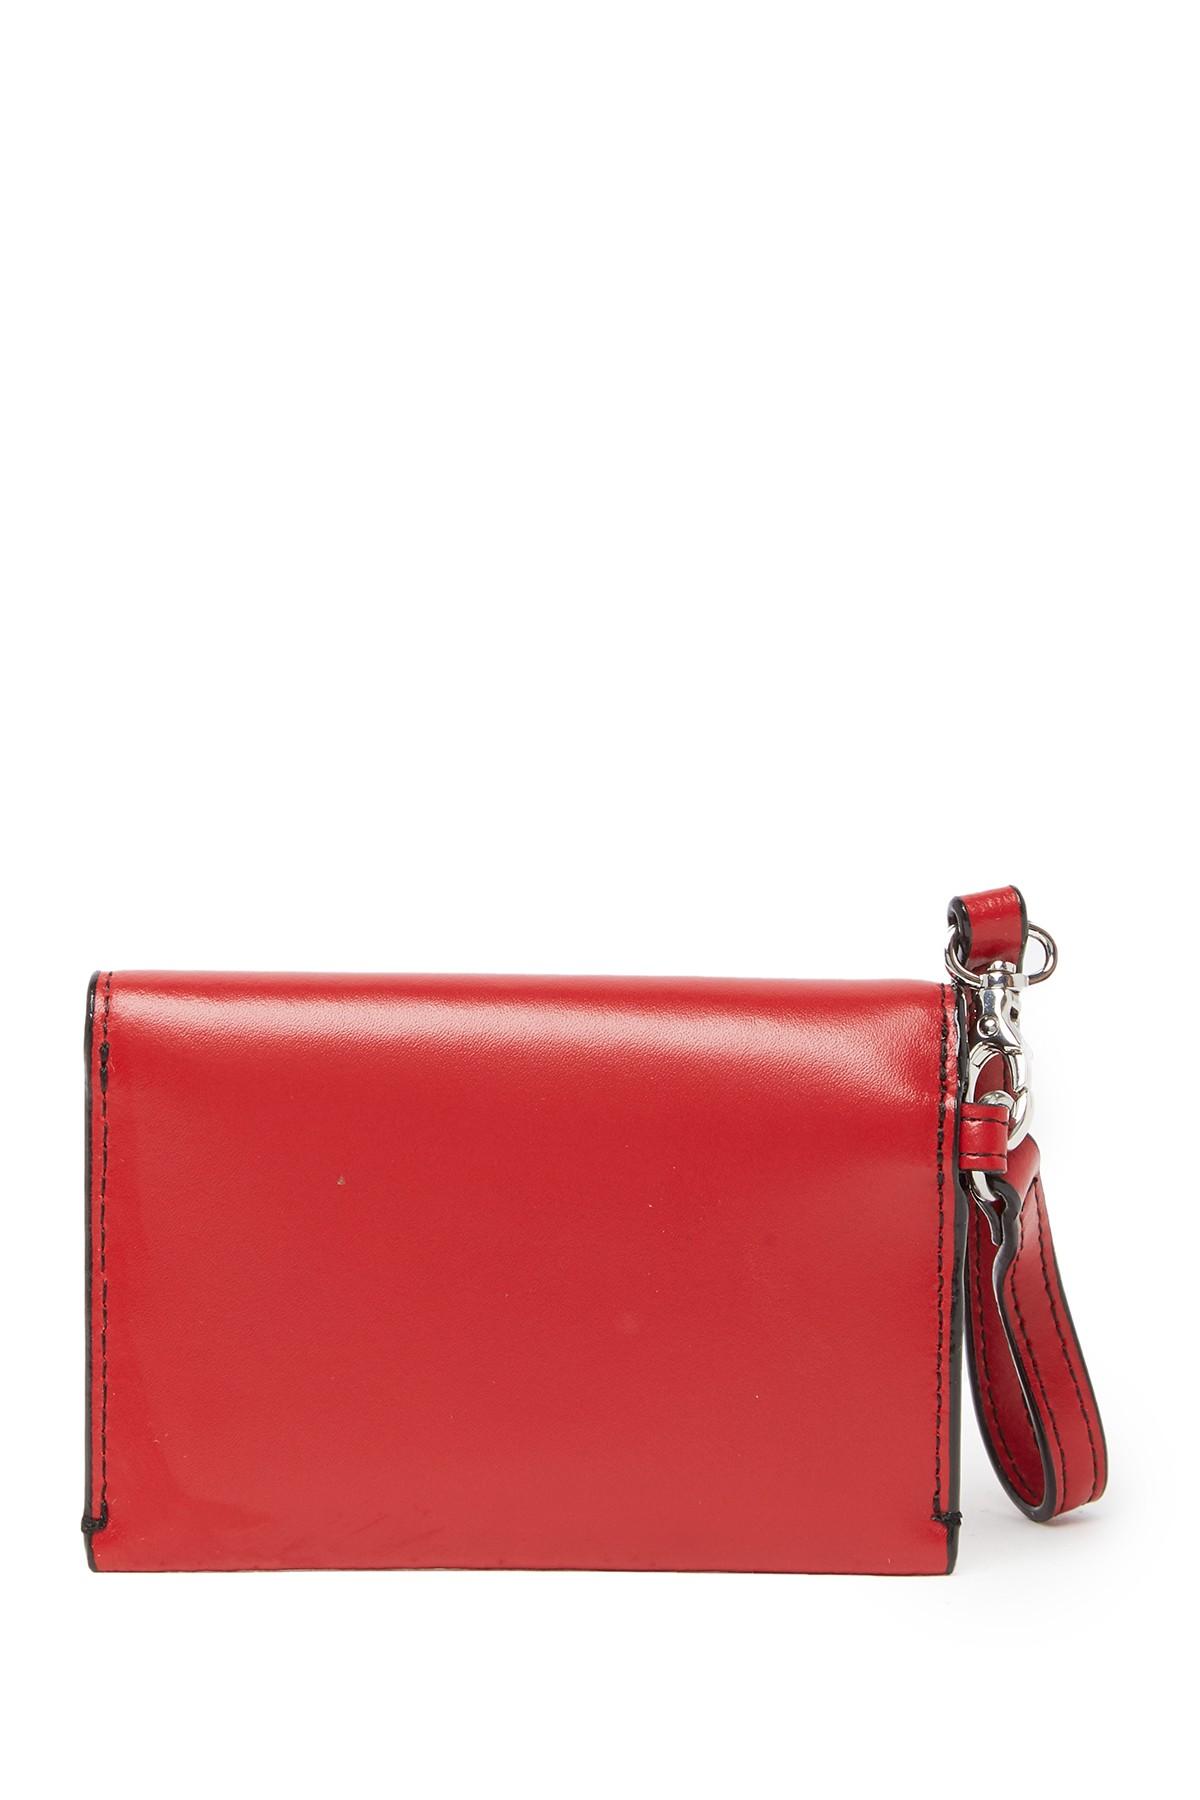 Lodis Audry Key Chain Wristlet Card Pouch in Red - Lyst